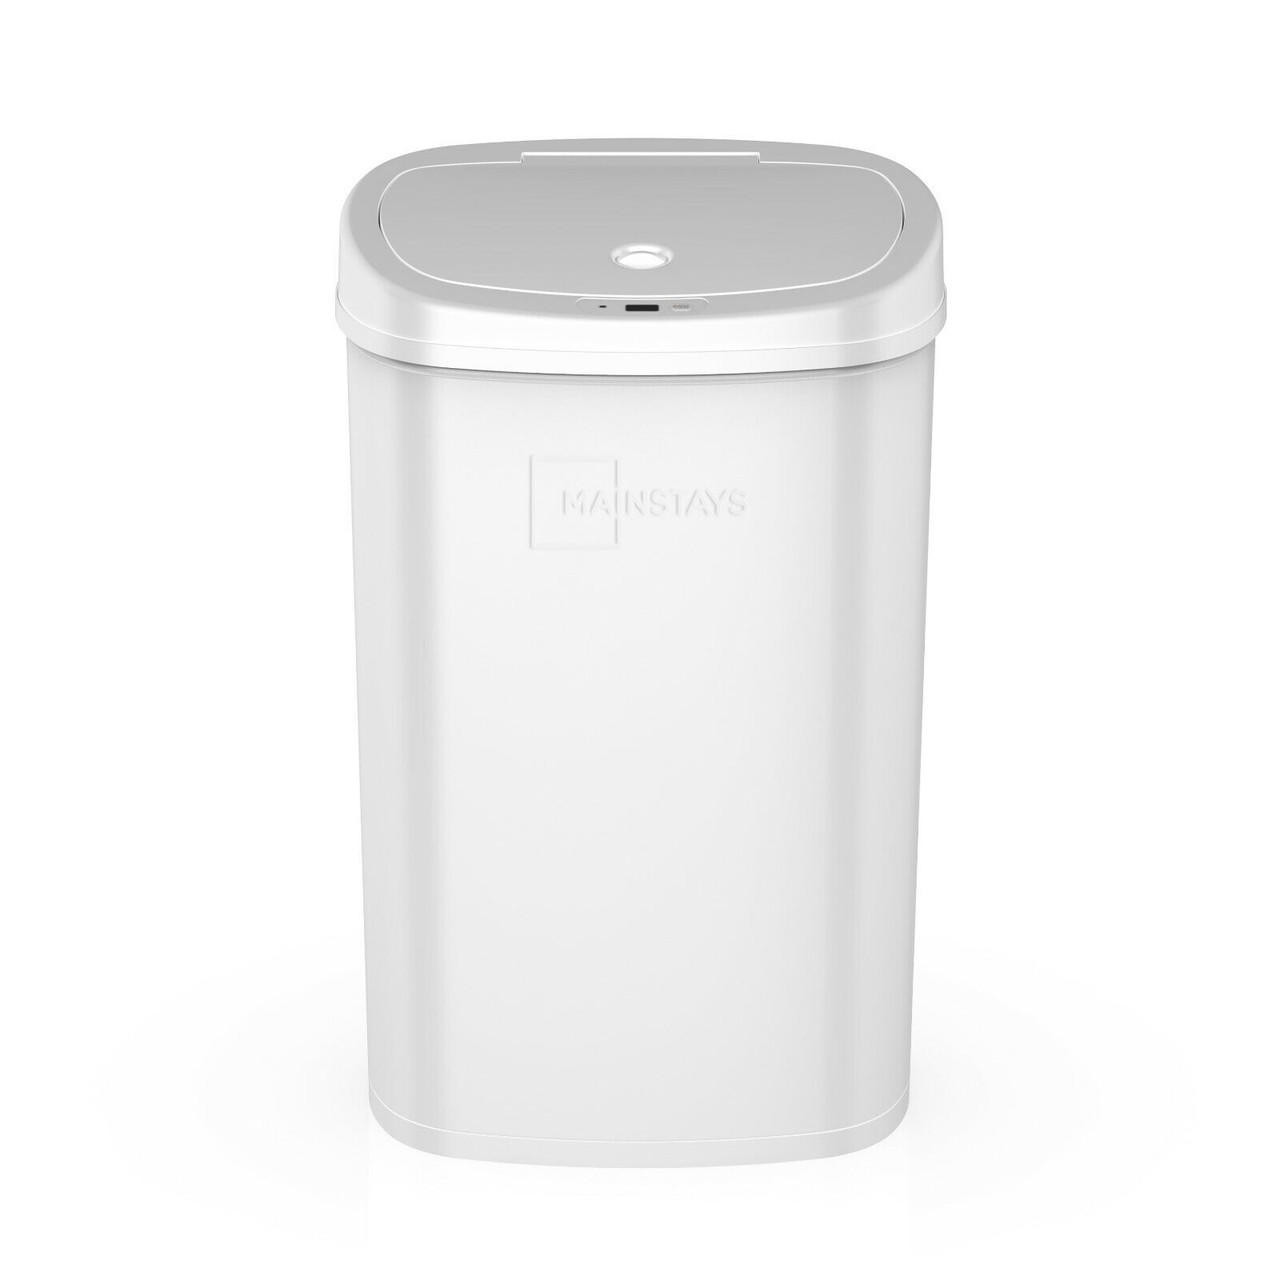 https://cdn11.bigcommerce.com/s-zrh8tkpr8d/images/stencil/1280x1280/products/10077/30948/kitchen-trash-can-13.2-gallon-stainless-steel-with-motion-sensor-hands-free-open__70460.1699470523.jpg?c=2&imbypass=on